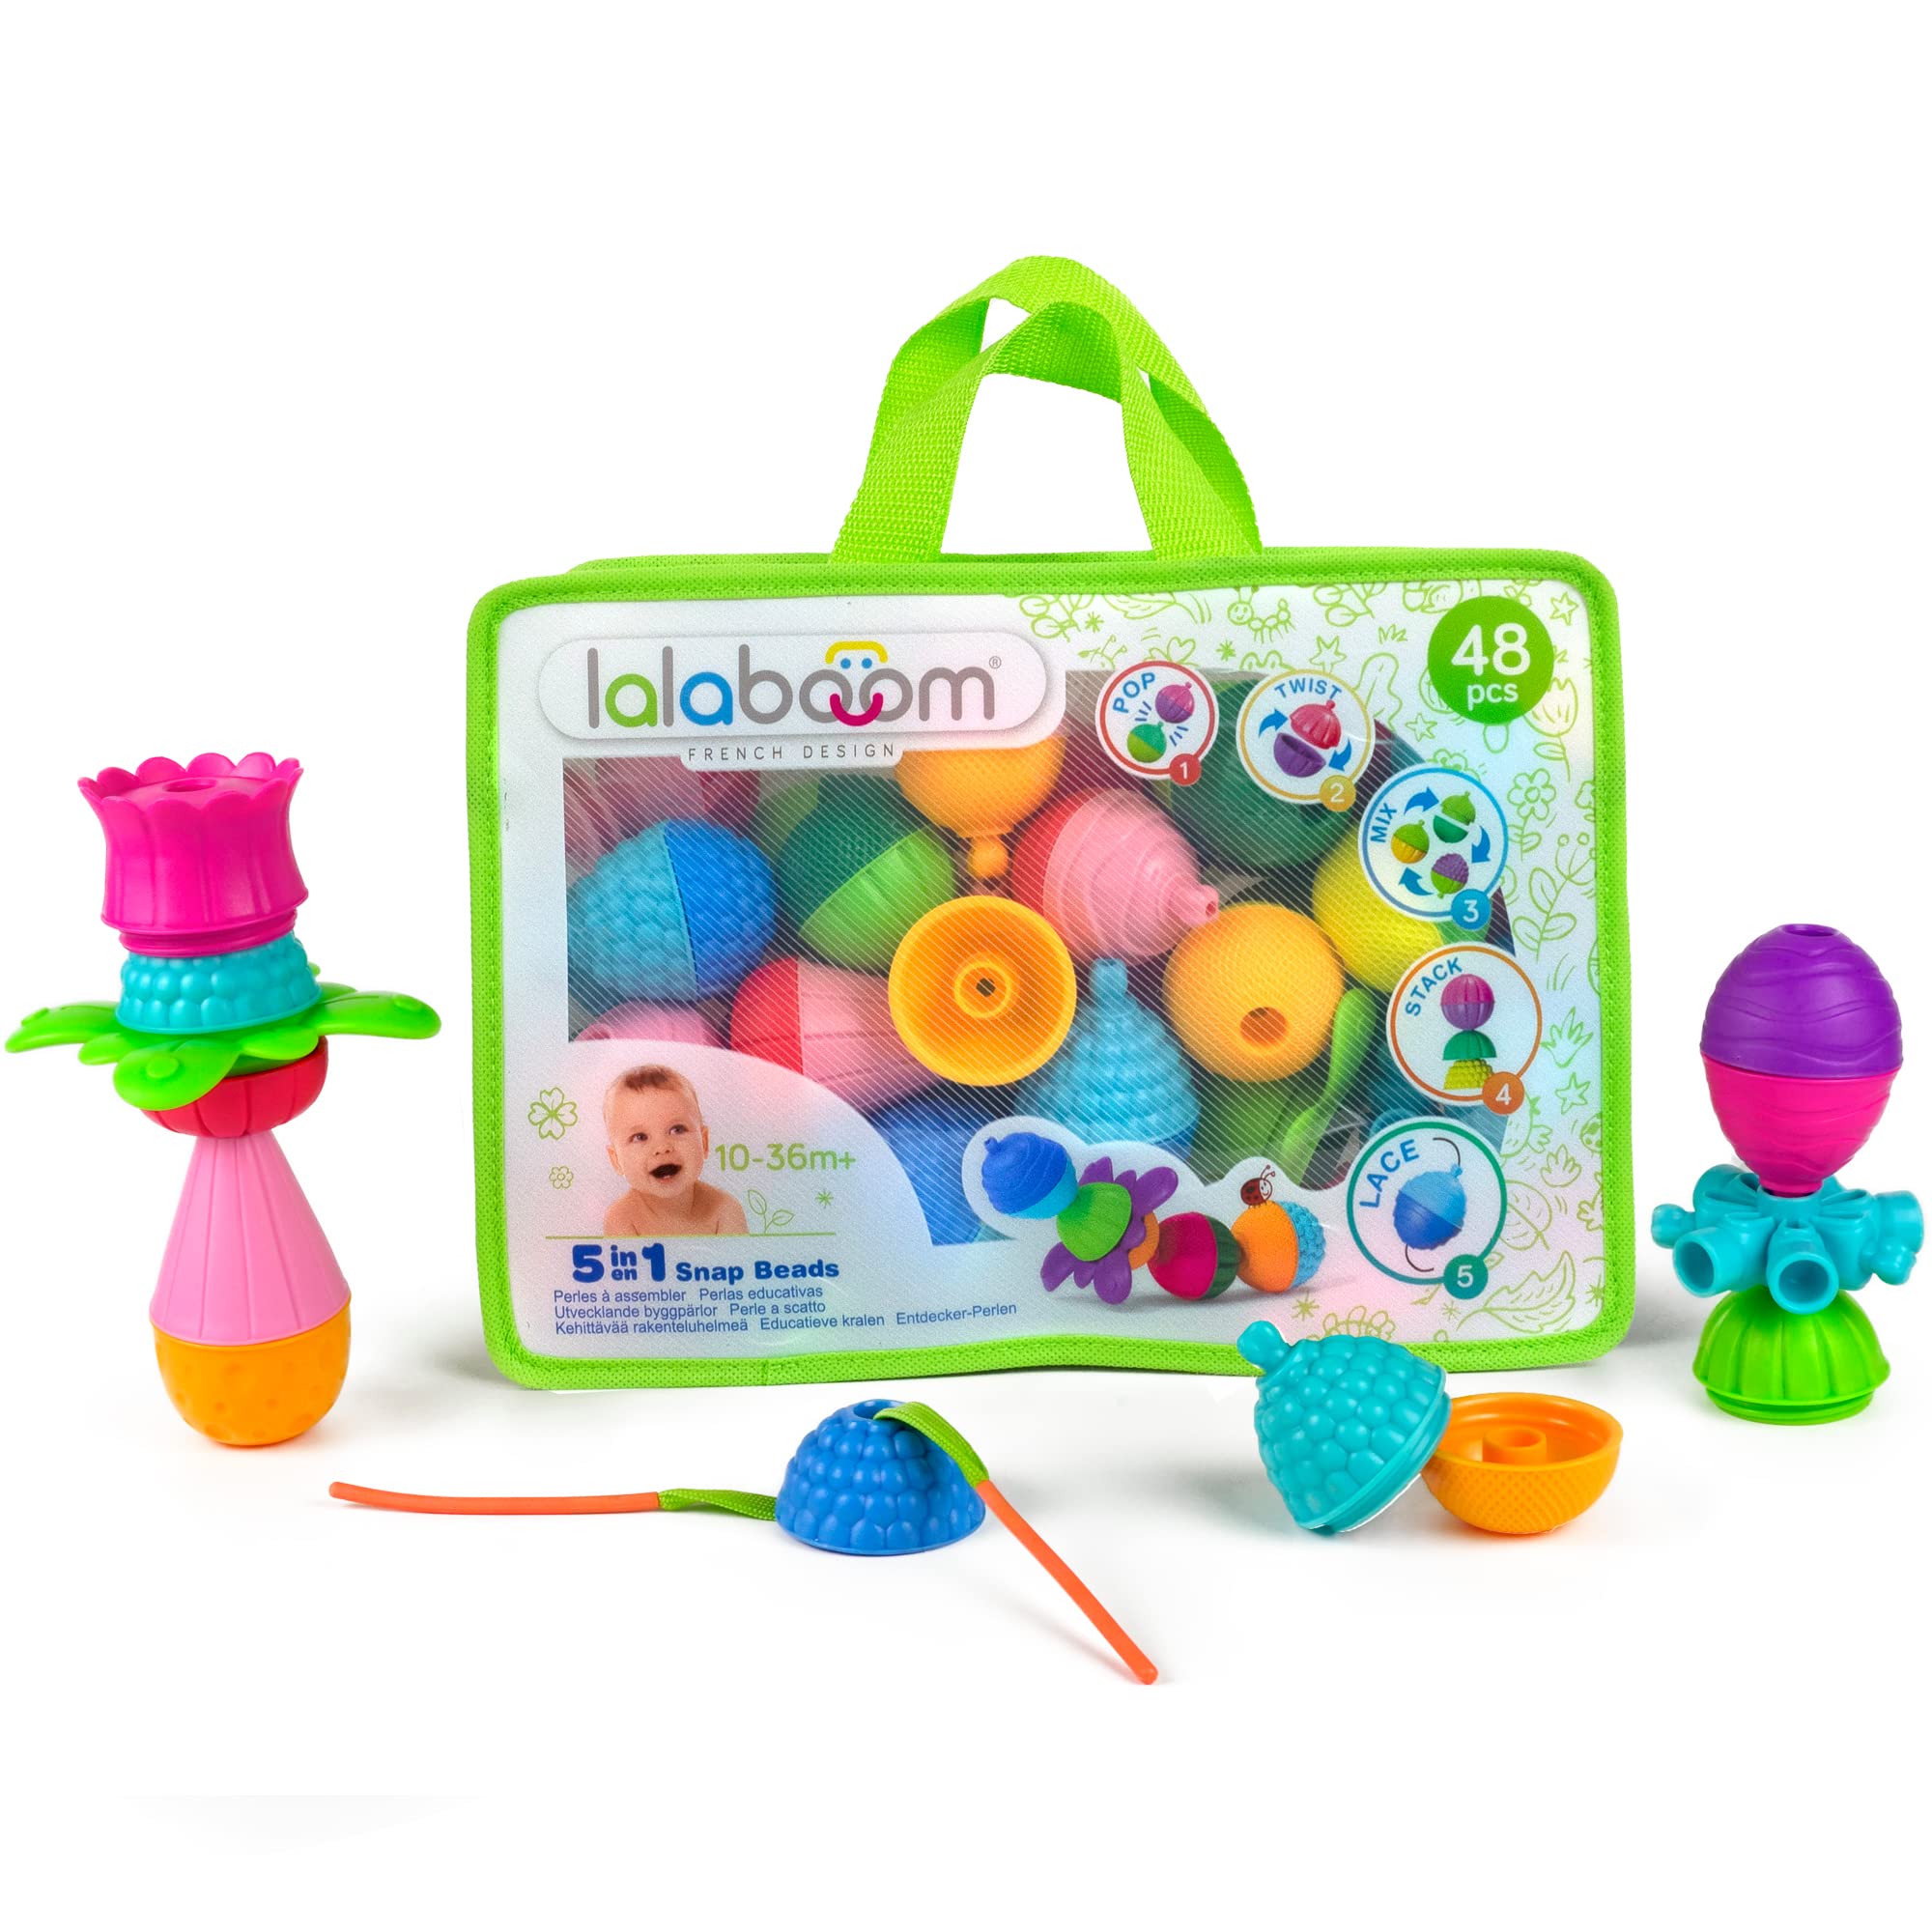 Lalaboom - Preschool Educational Beads - Montessori Shapes and Colors Construction Game and Learning Toy for Babies and Children from 10 Months to 4 Years Old - BL460, 48 Pieces in a Zipper Bag, Klein